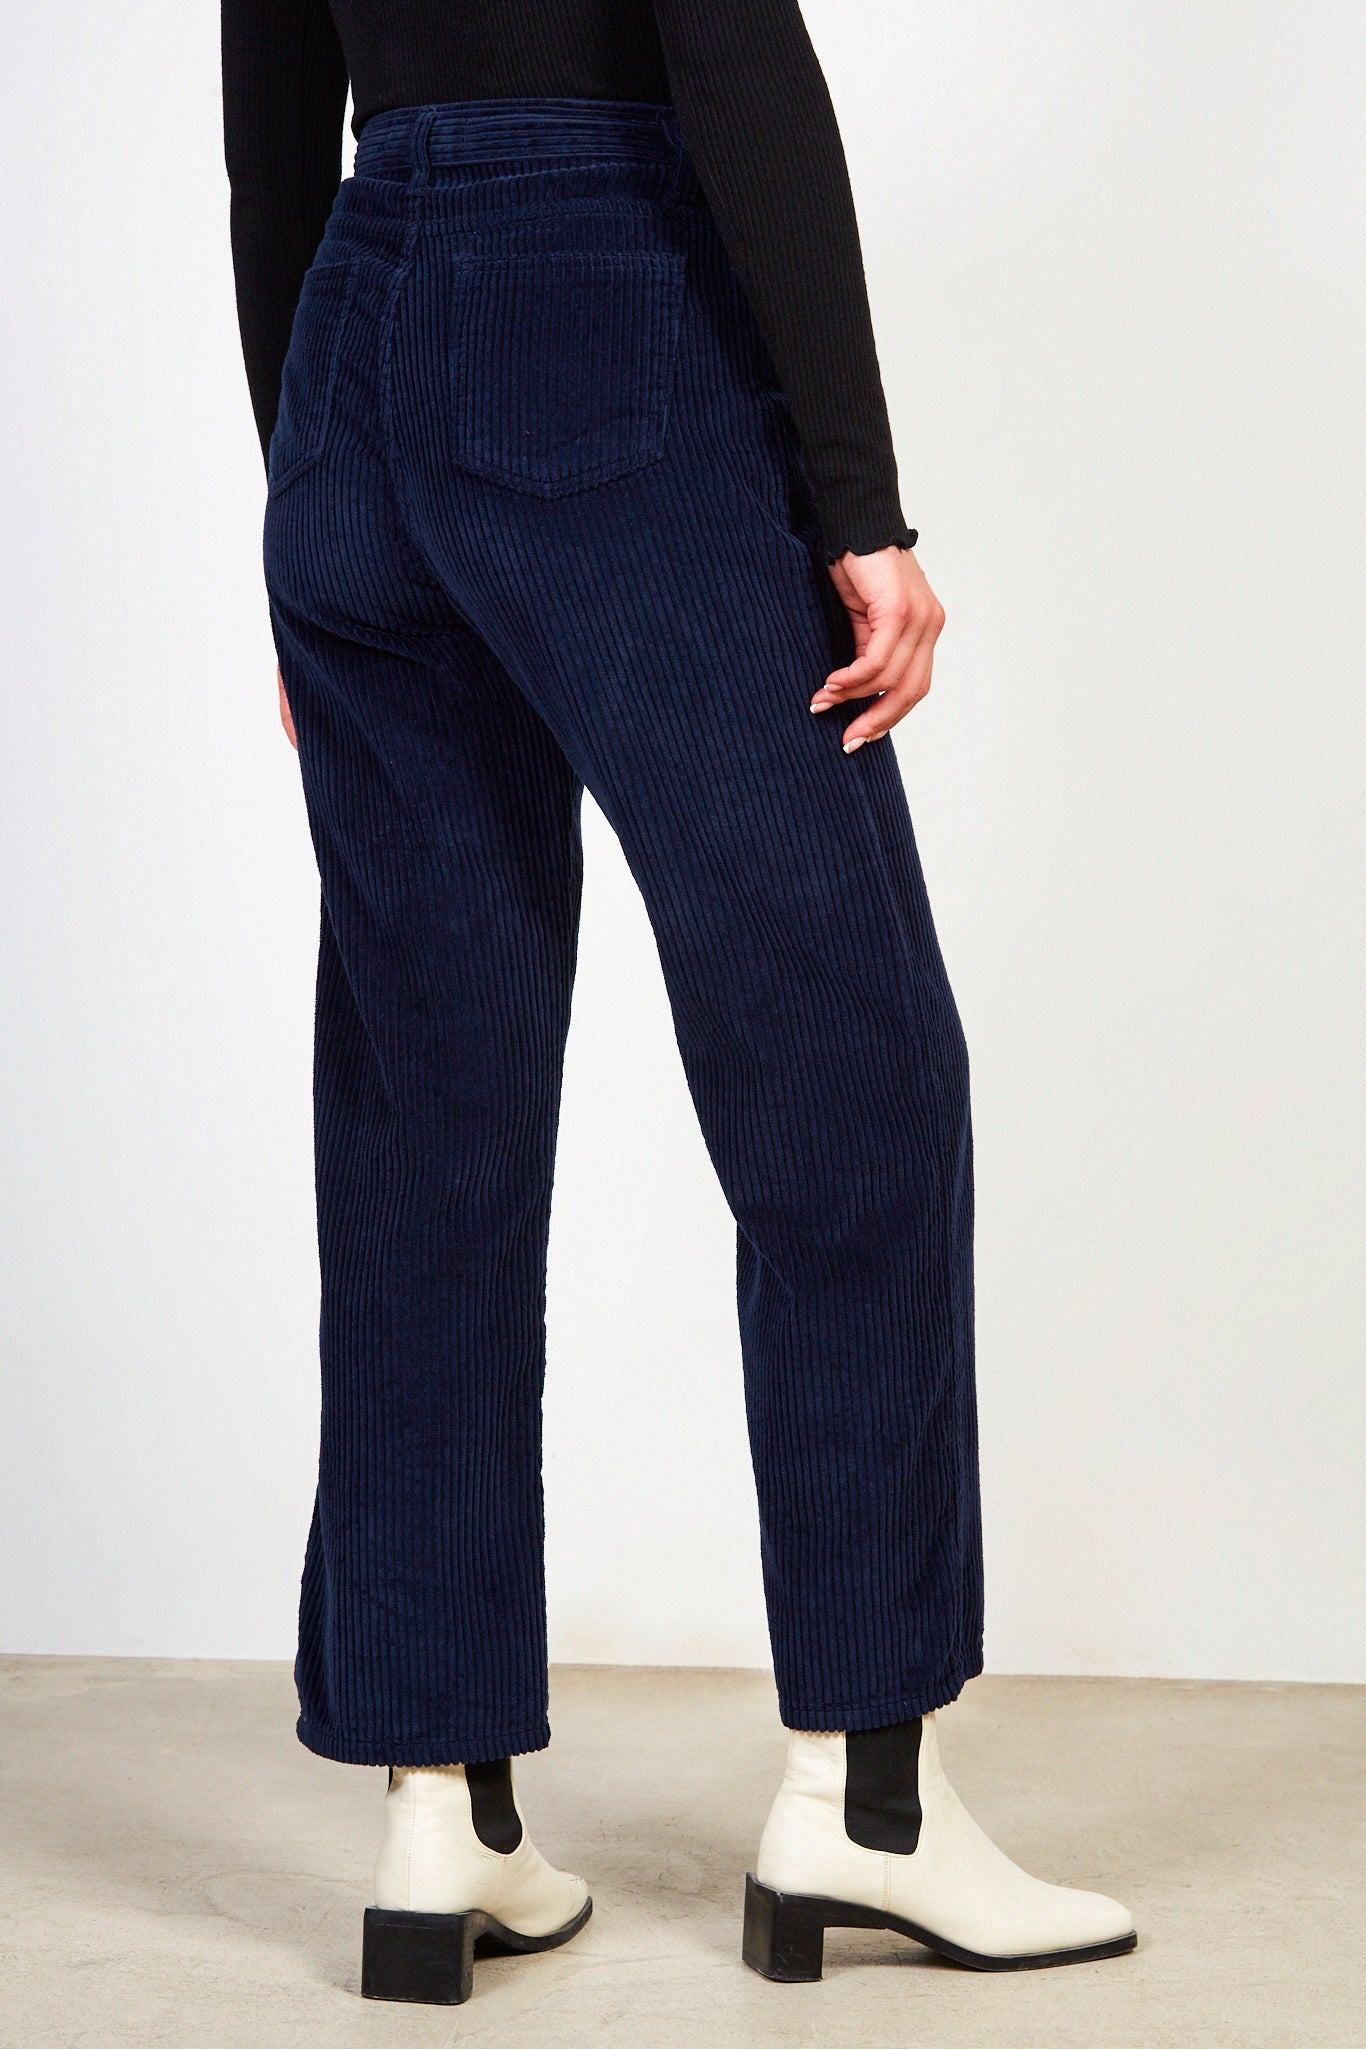 Navy large wale corduroy trousers